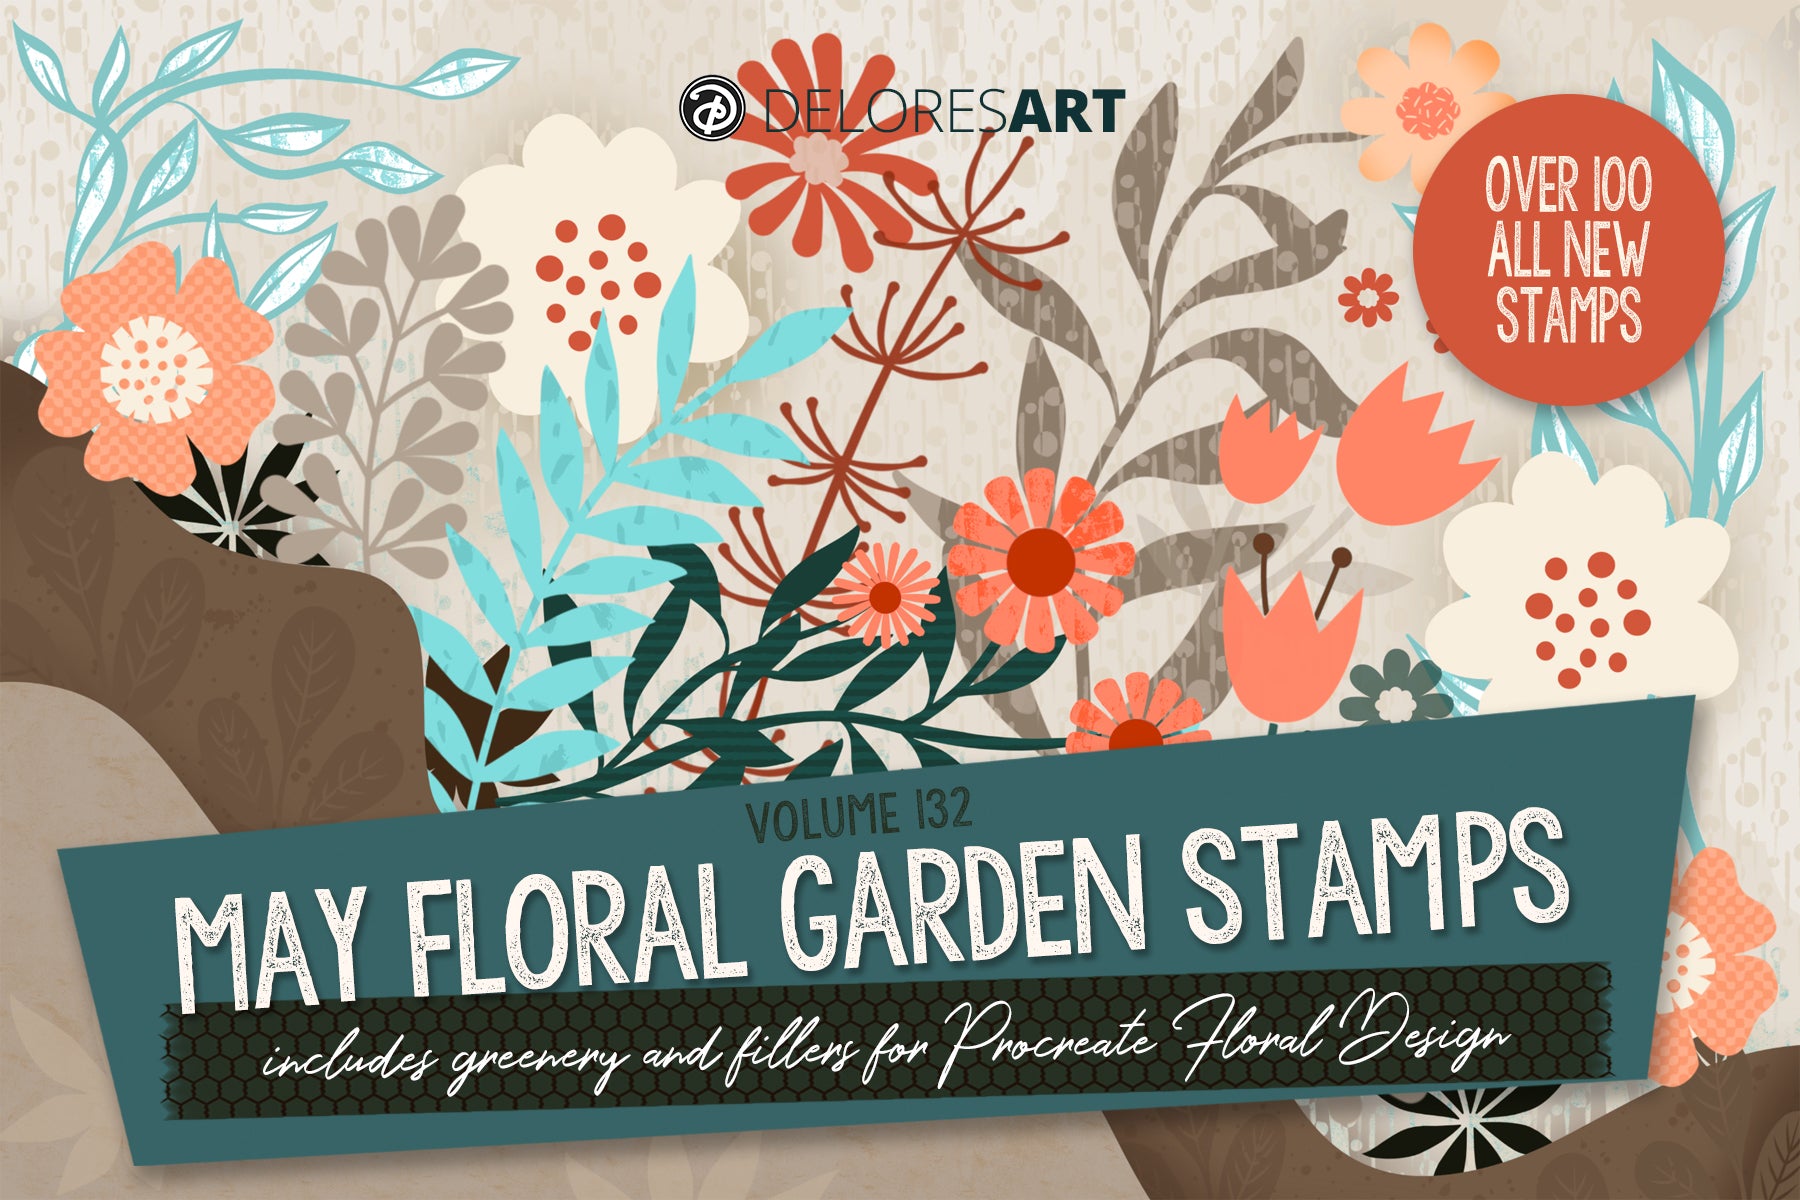 Volume 136 - May Floral Gloral Garden Stamps